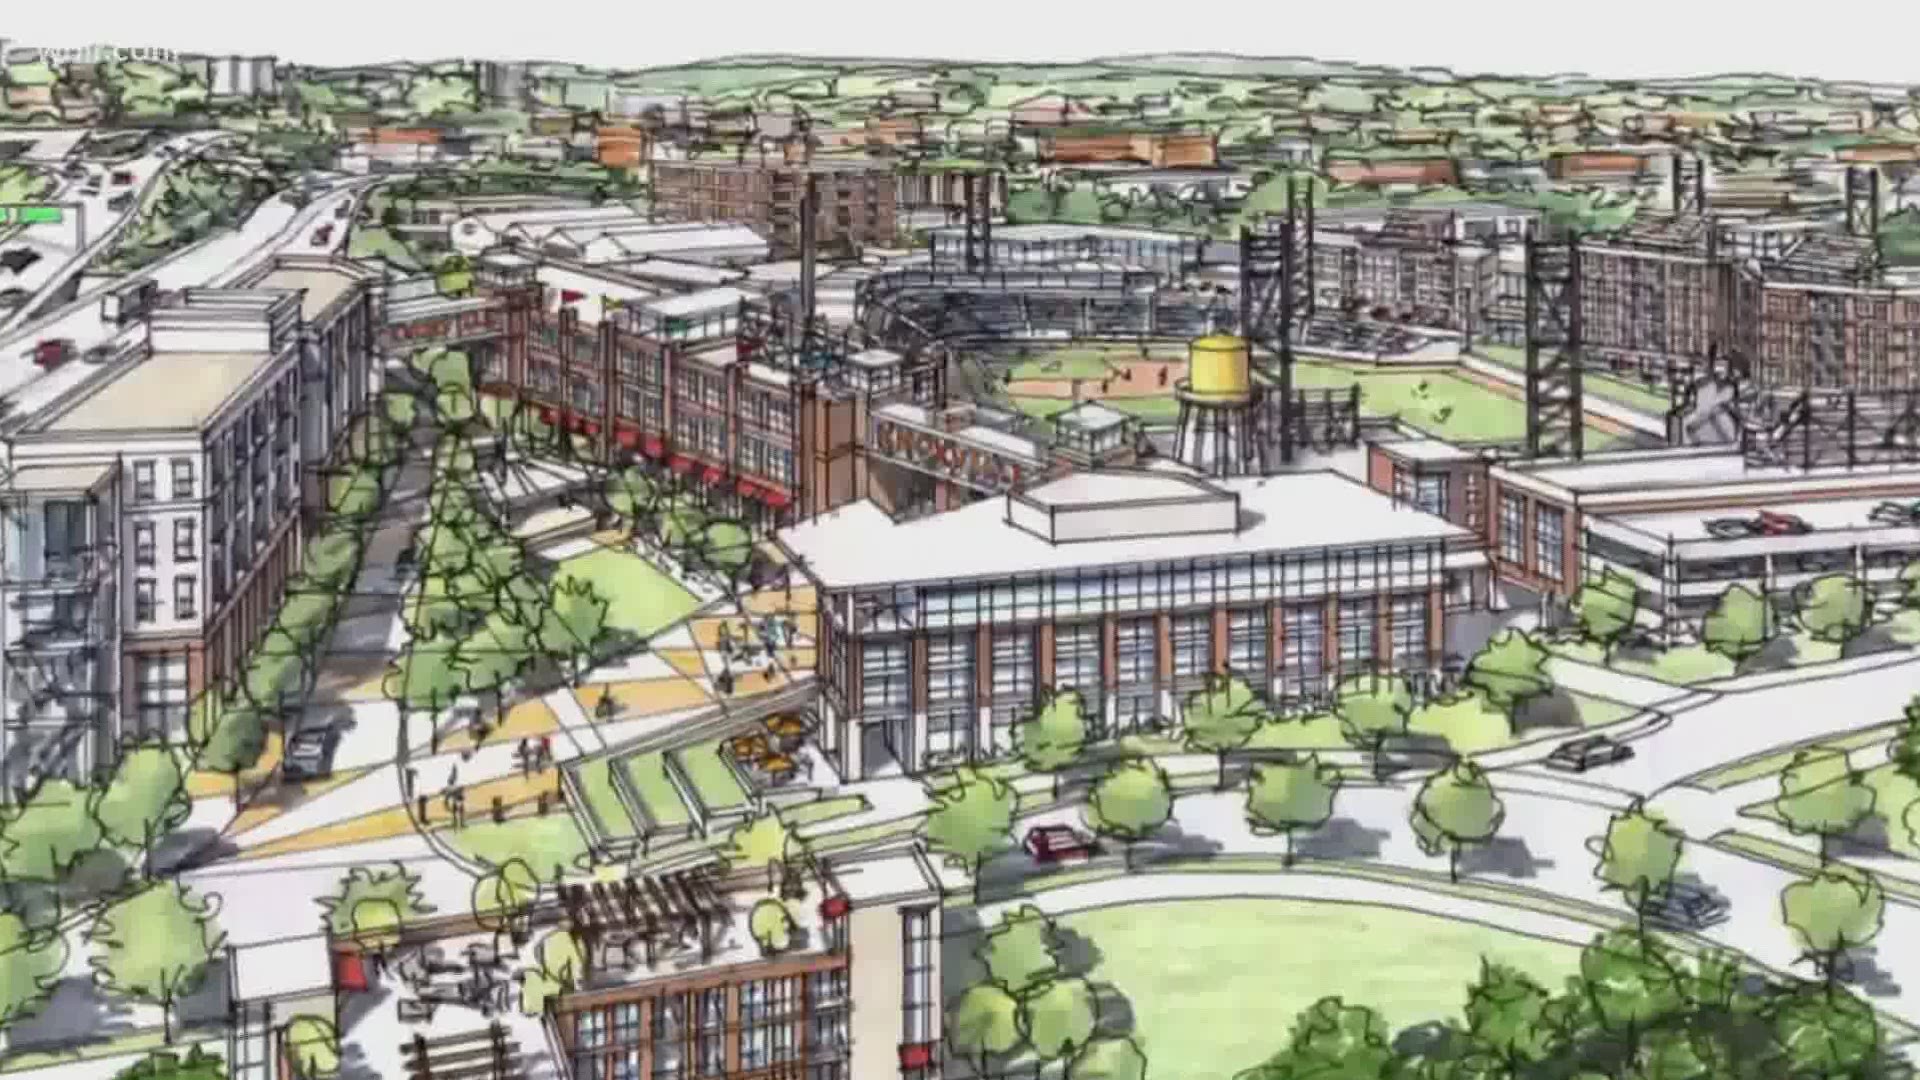 Community groups want to make sure people living in East Knoxville benefit from a new multi-use stadium near The Old City.